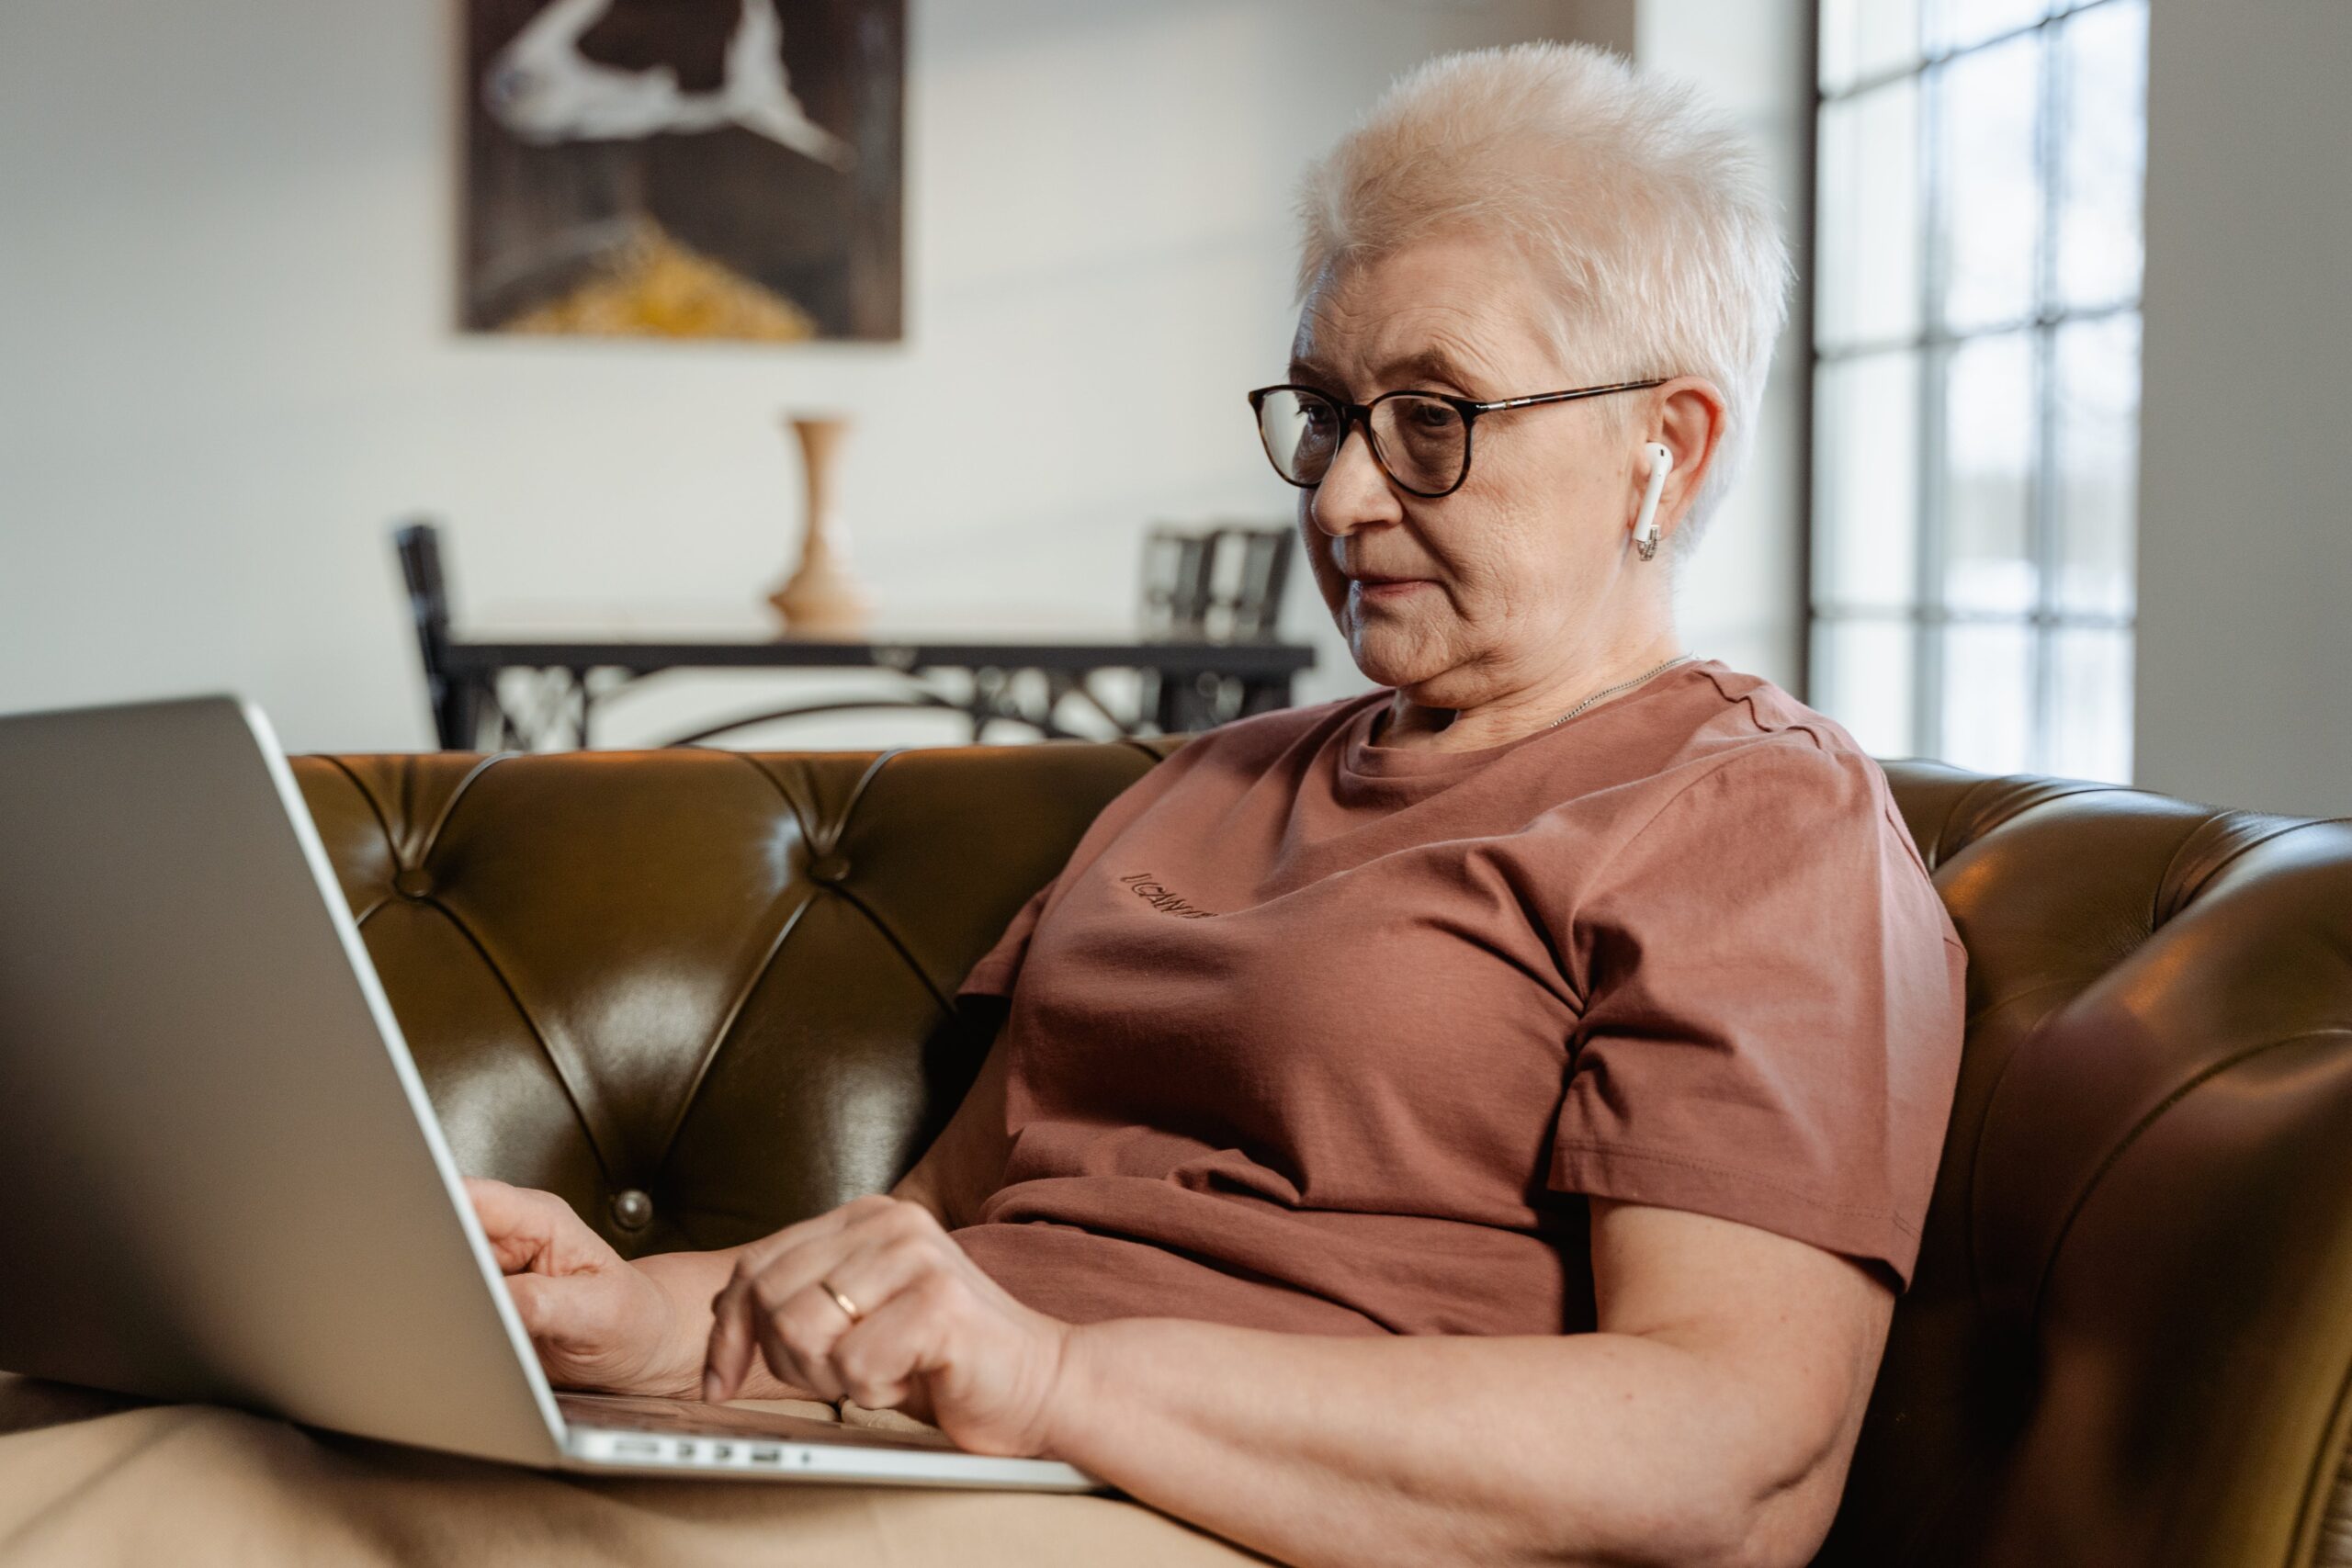 An older women lays on a couch looking at a laptop that is perched on her legs. She is wearing wireless earbuds and glasses, and her hands are poised over the keyboard as if she is about to type.